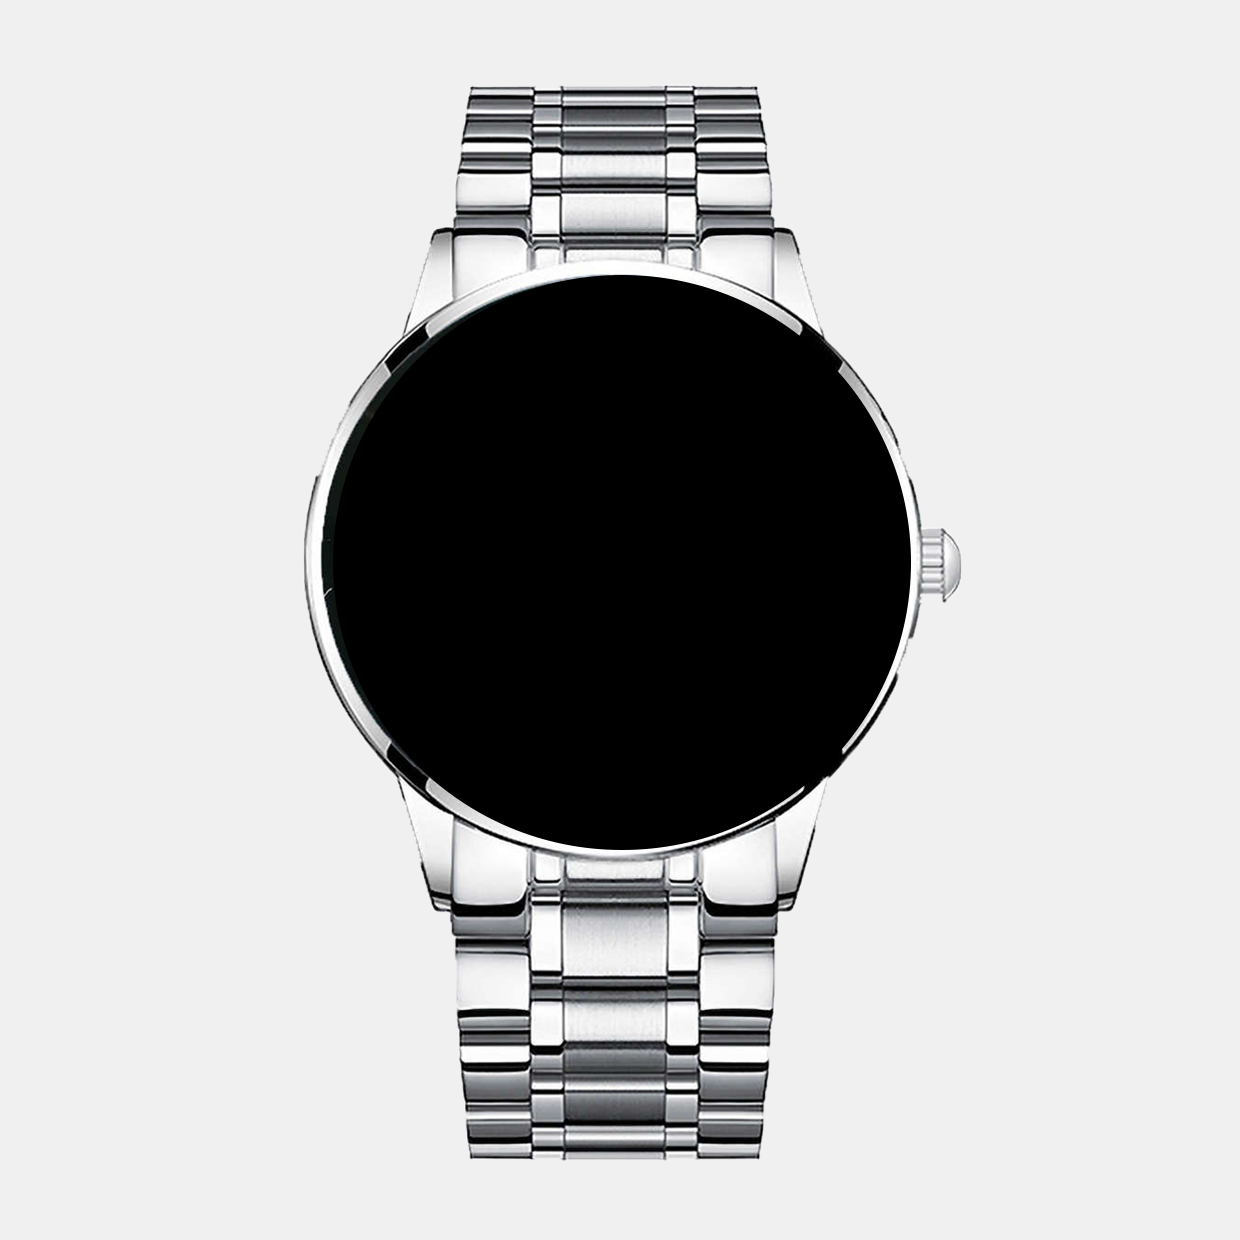 This image displays a sleek, silver metal watch band with a simple, sophisticated design. It showcases a modern aesthetic typical of the innovative watch designs from DriftElement, a young startup from Germany that specializes in timepieces with unique wheel rim-inspired designs.